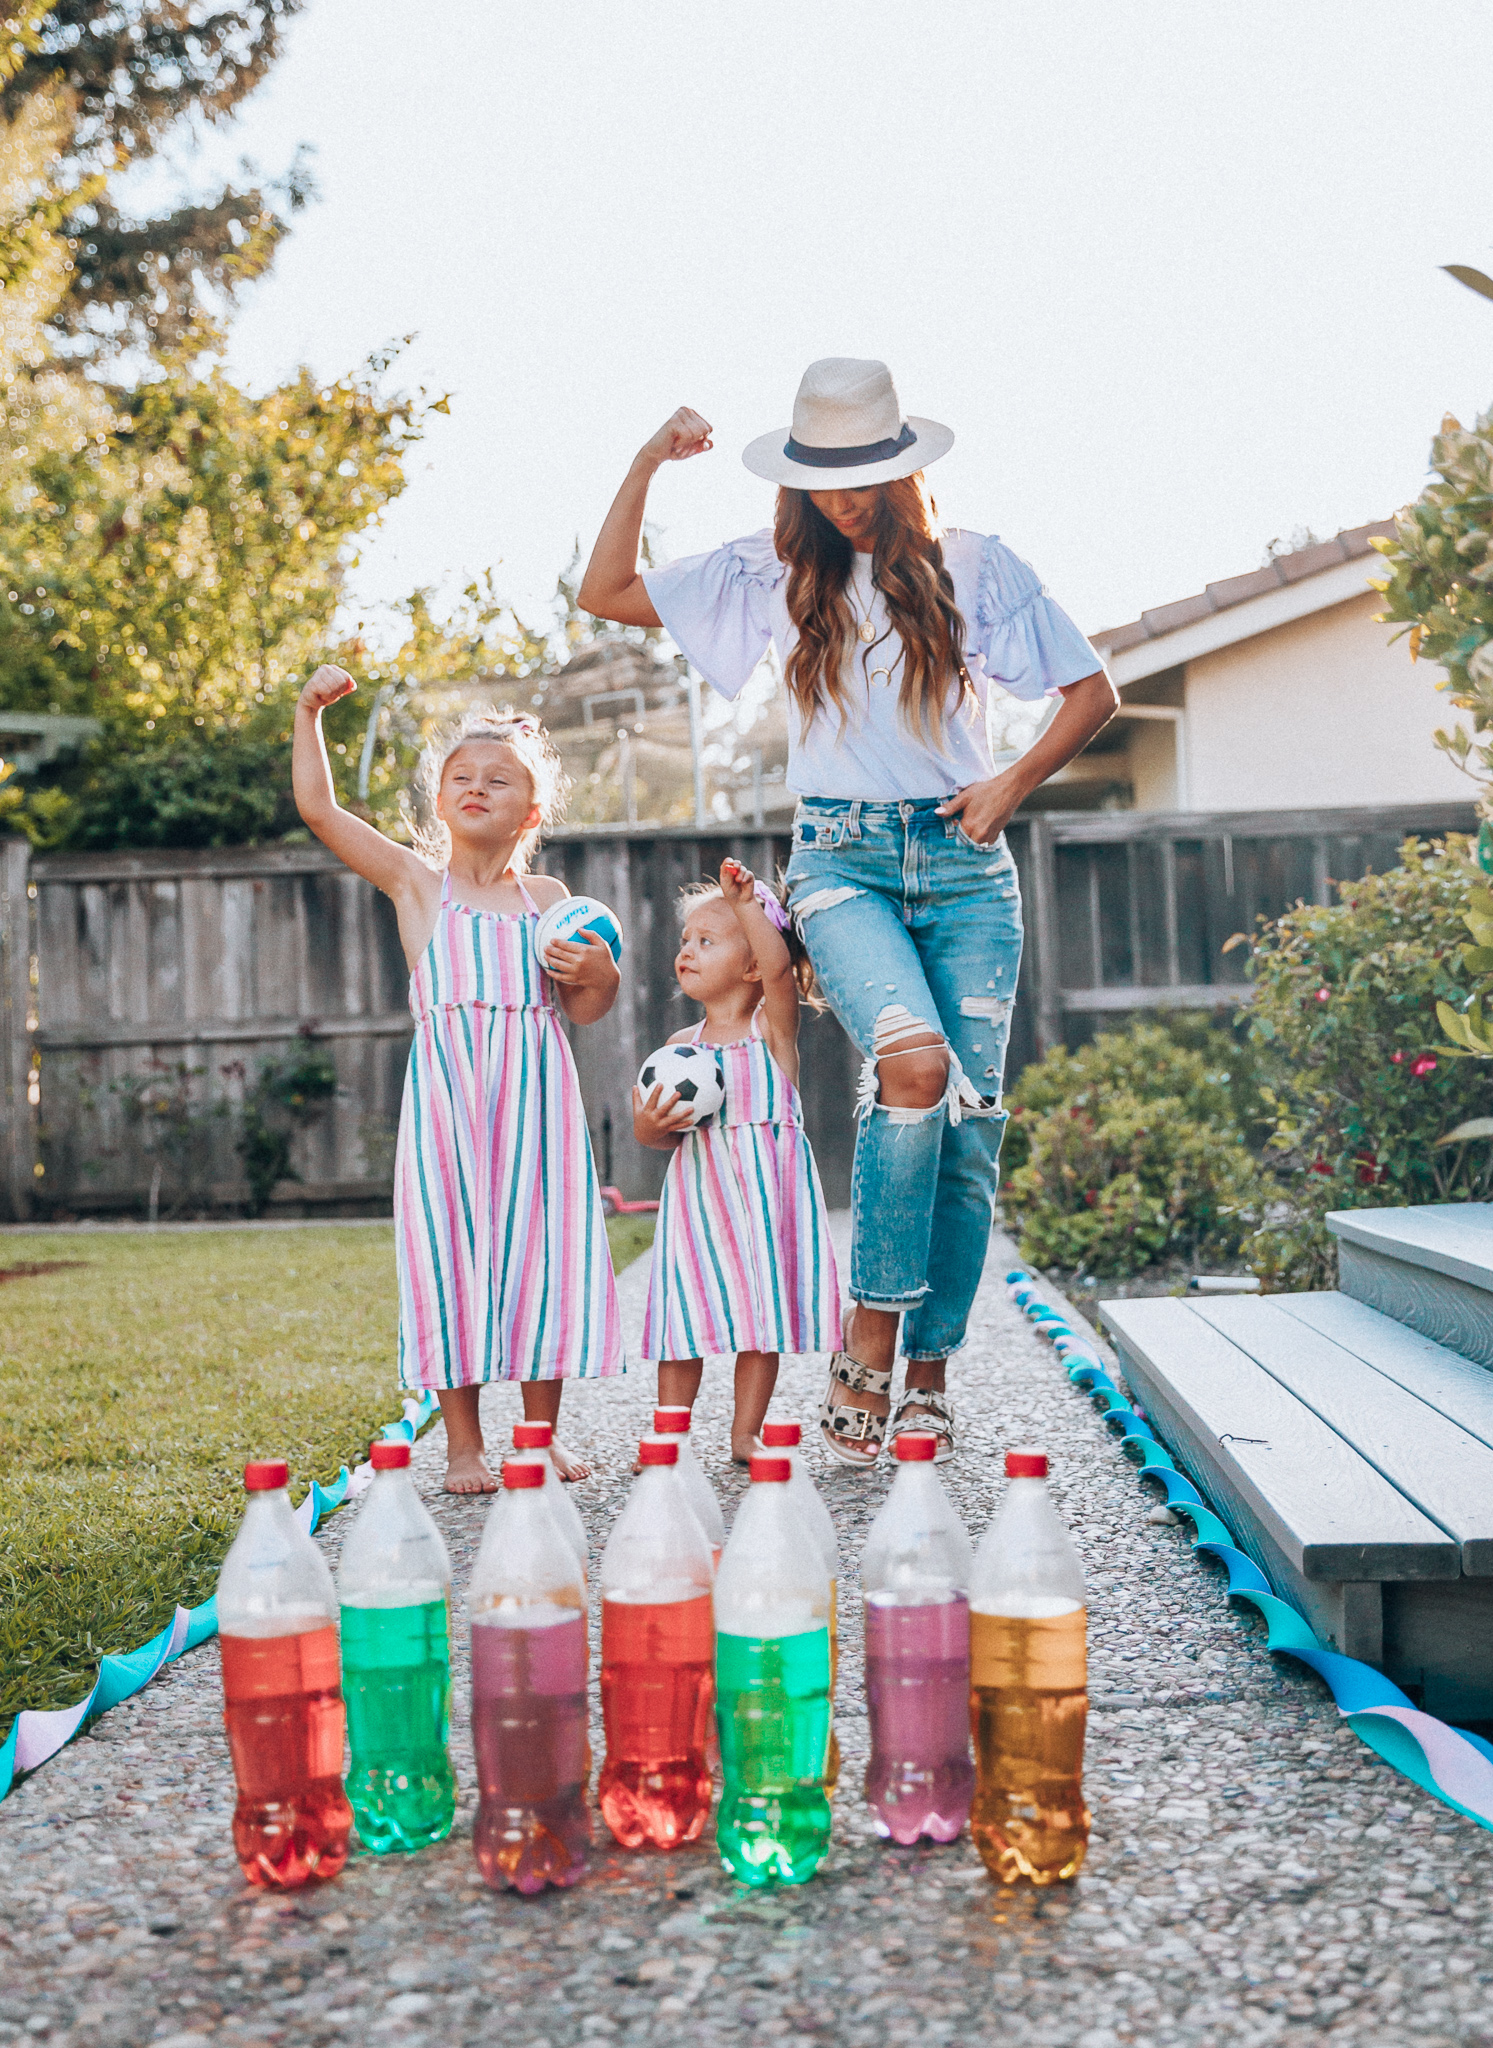 Fun Summer Activities for Kids-Part 2 by popular mom blog The Girl in the Yellow Dress: image of woman and two young girls playing outdoor bowling.  Woman is wearing a Brixton Joanna Straw Hat, Naughty Monkey Women's Hey Pony Sandal, Abercrombie and Fitch Boyfriend jeans, and a Nordstrom ruffle sleeve top.  Girls are wearing an Oldnavy Striped Ruffle-Trim Halter Midi Dress. 